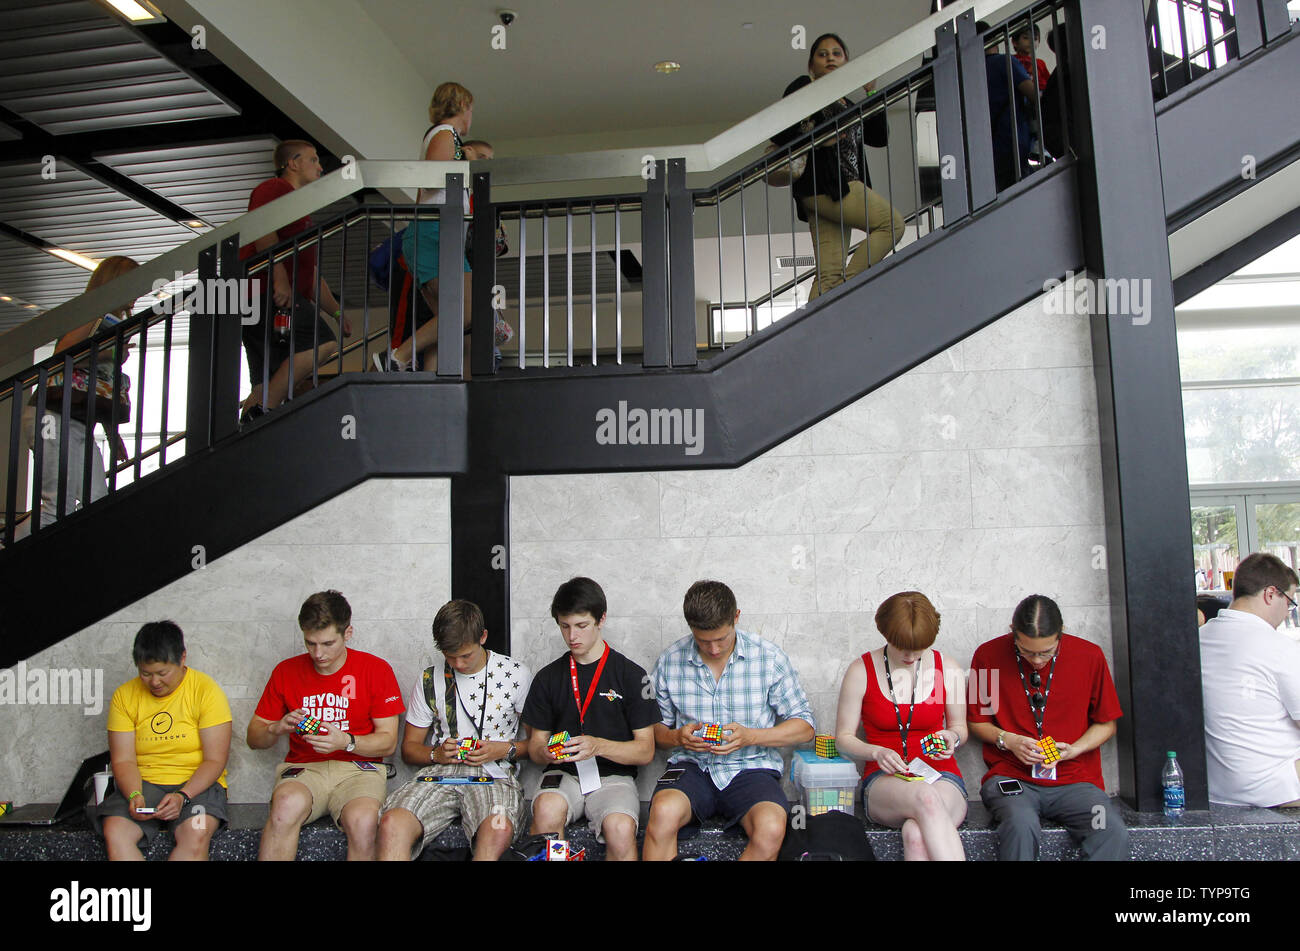 Contestants practice and warm up before competing at the National Rubik's Cube Championship at Liberty Science Center in Jersey City, NJ on August 1, 2014. The Championship and the Guinness Book of World Records challenge are being held in conjunction with the Center's Beyond Rubik's Cube exhibition, marking the 40th anniversary of the Rubik's Cube and its impact on the world.        UPI/John Angelillo Stock Photo